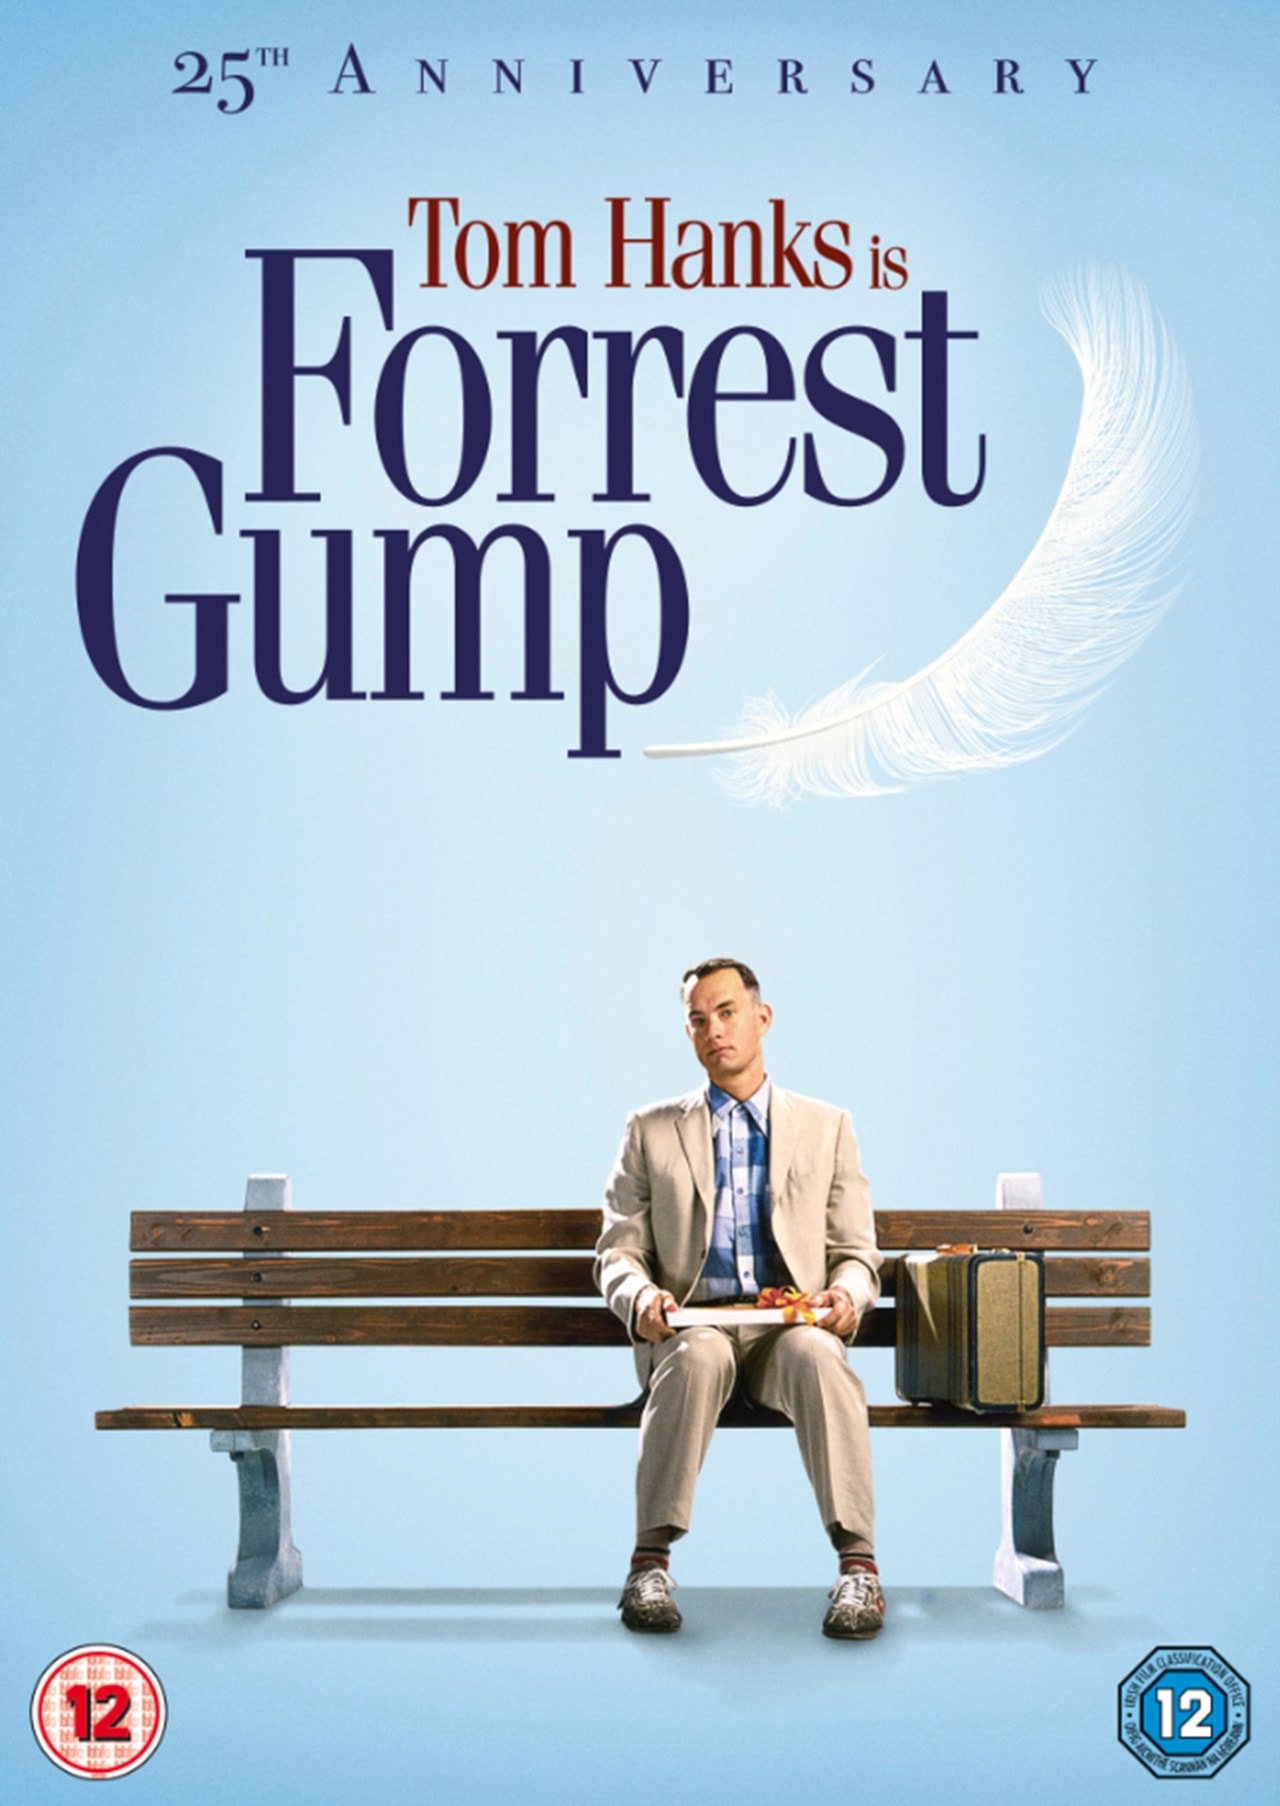 Forrest Gump | DVD | Free shipping over £20 | HMV Store